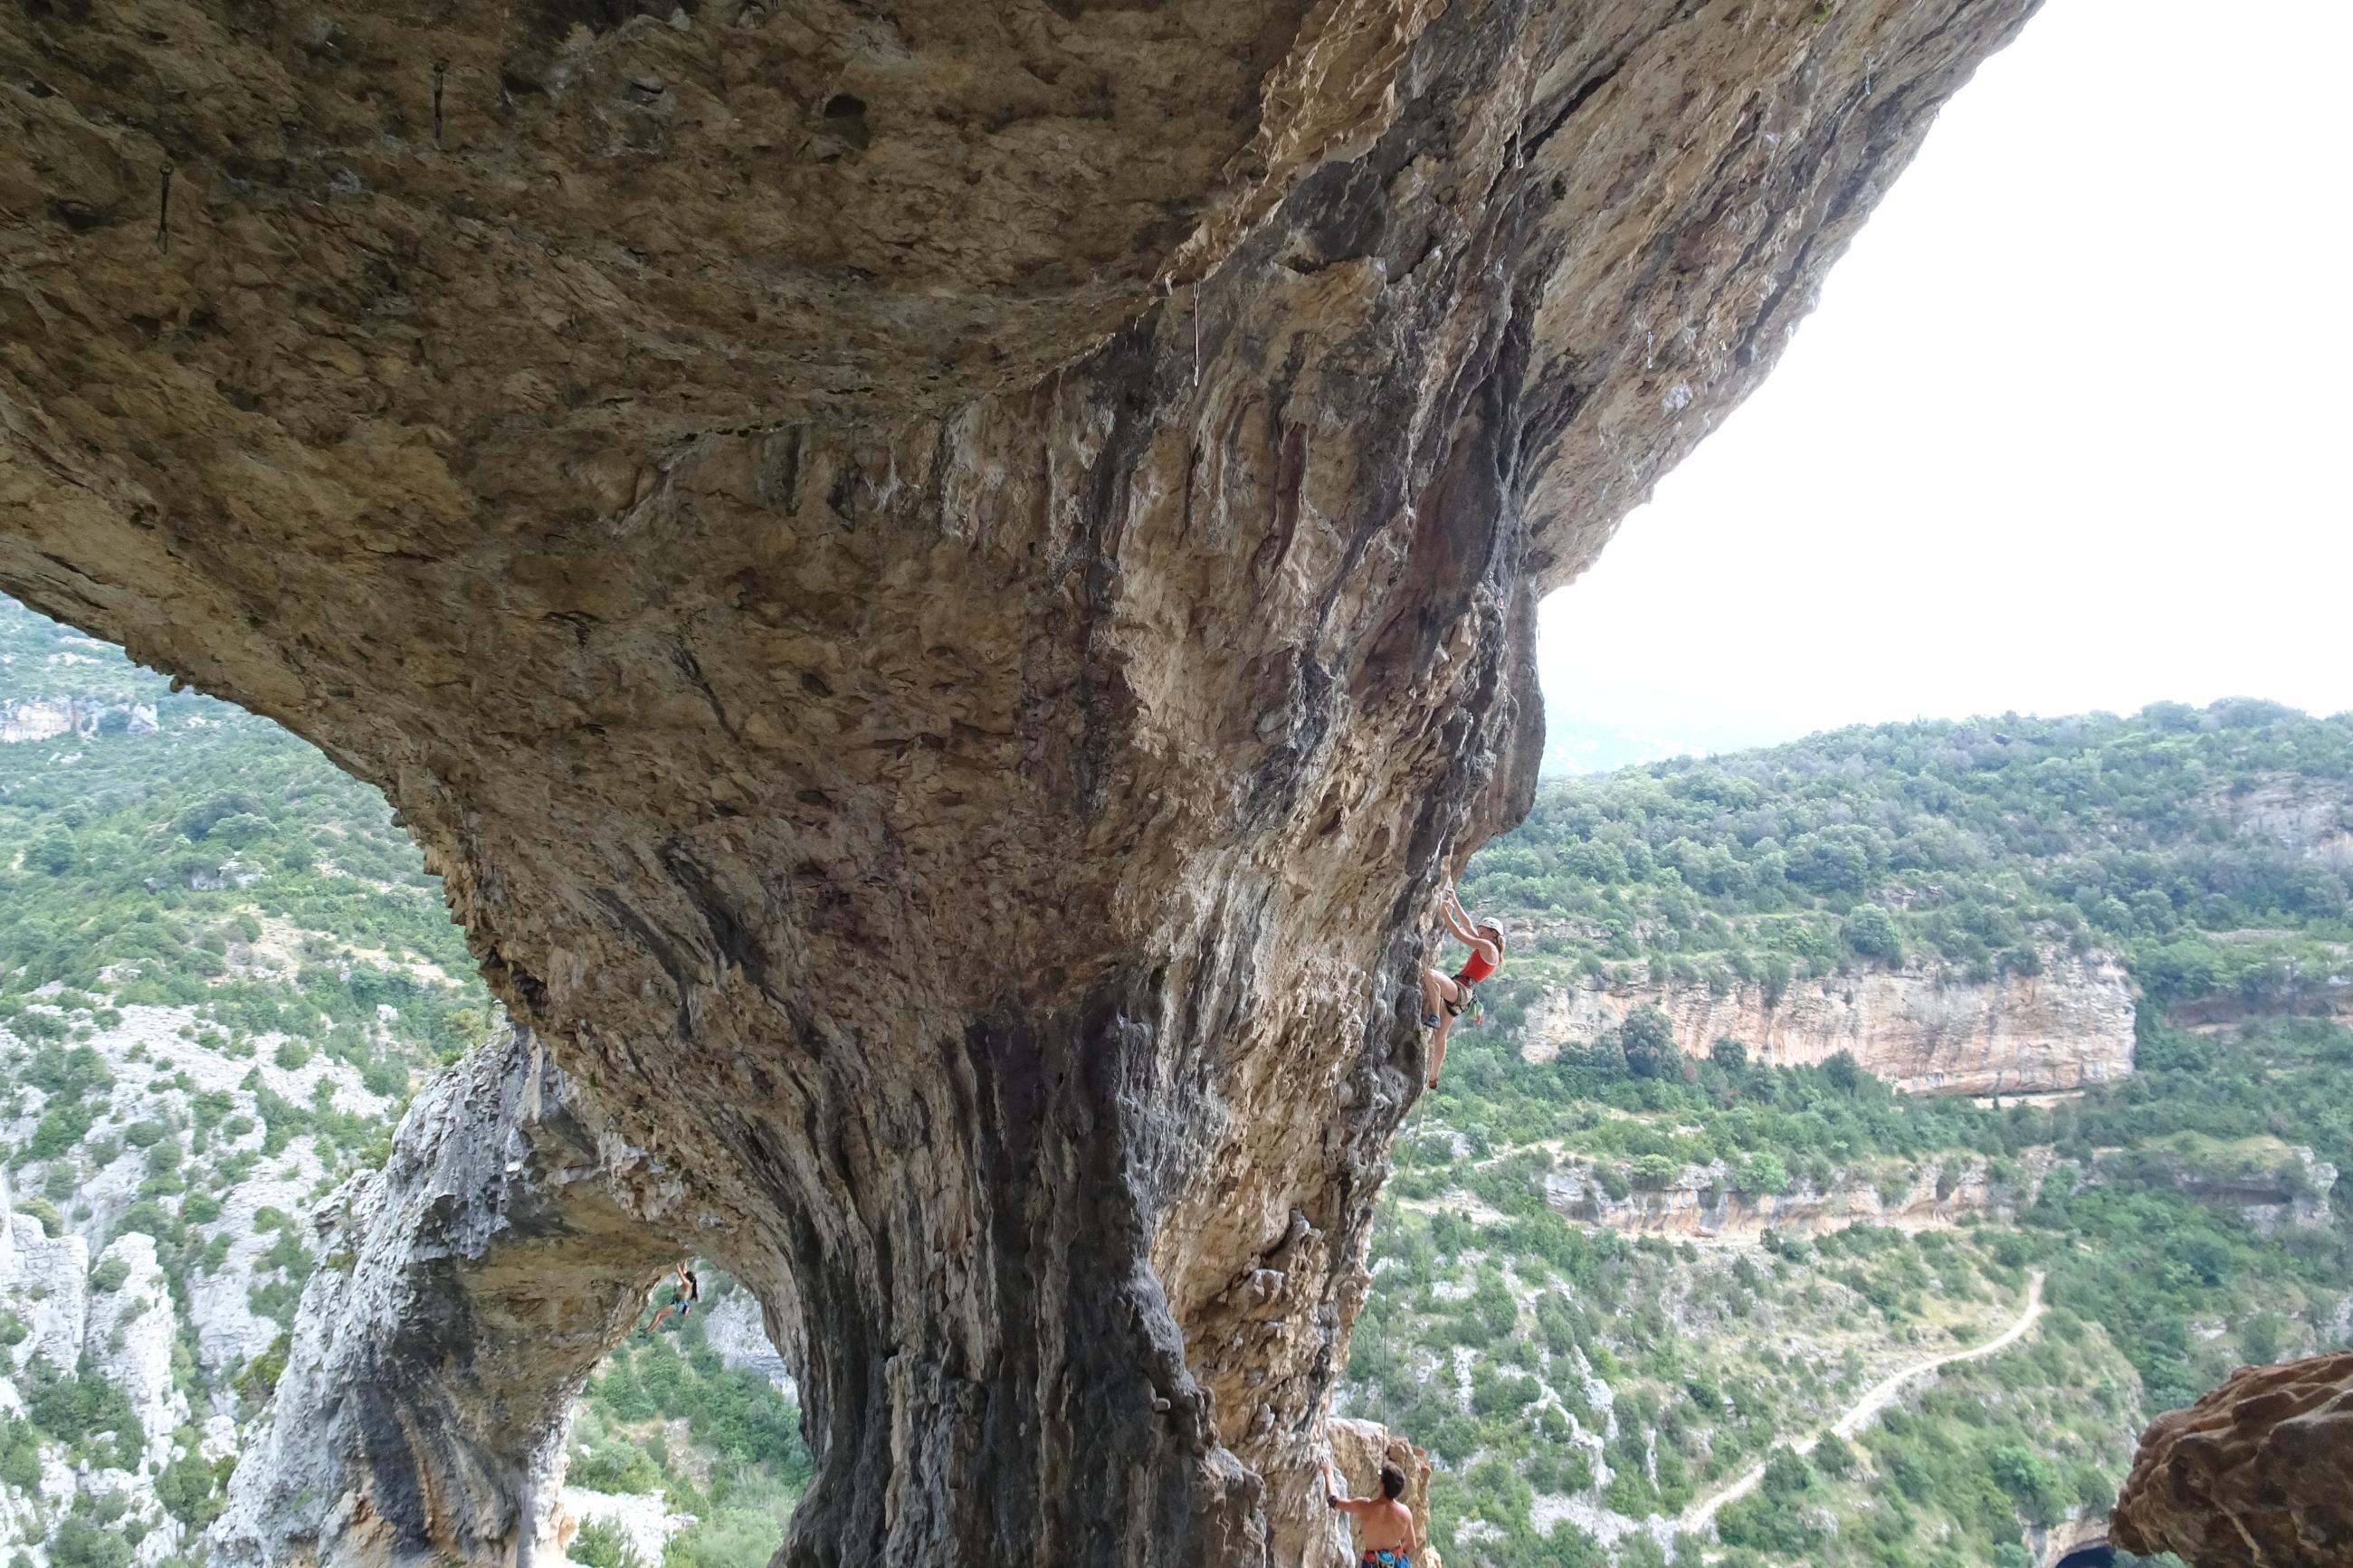 Ott, in her first trimester, in the red top (center) with her partner, Chaz (bottom right), belaying while they were rock climbing in Spain in 2017.